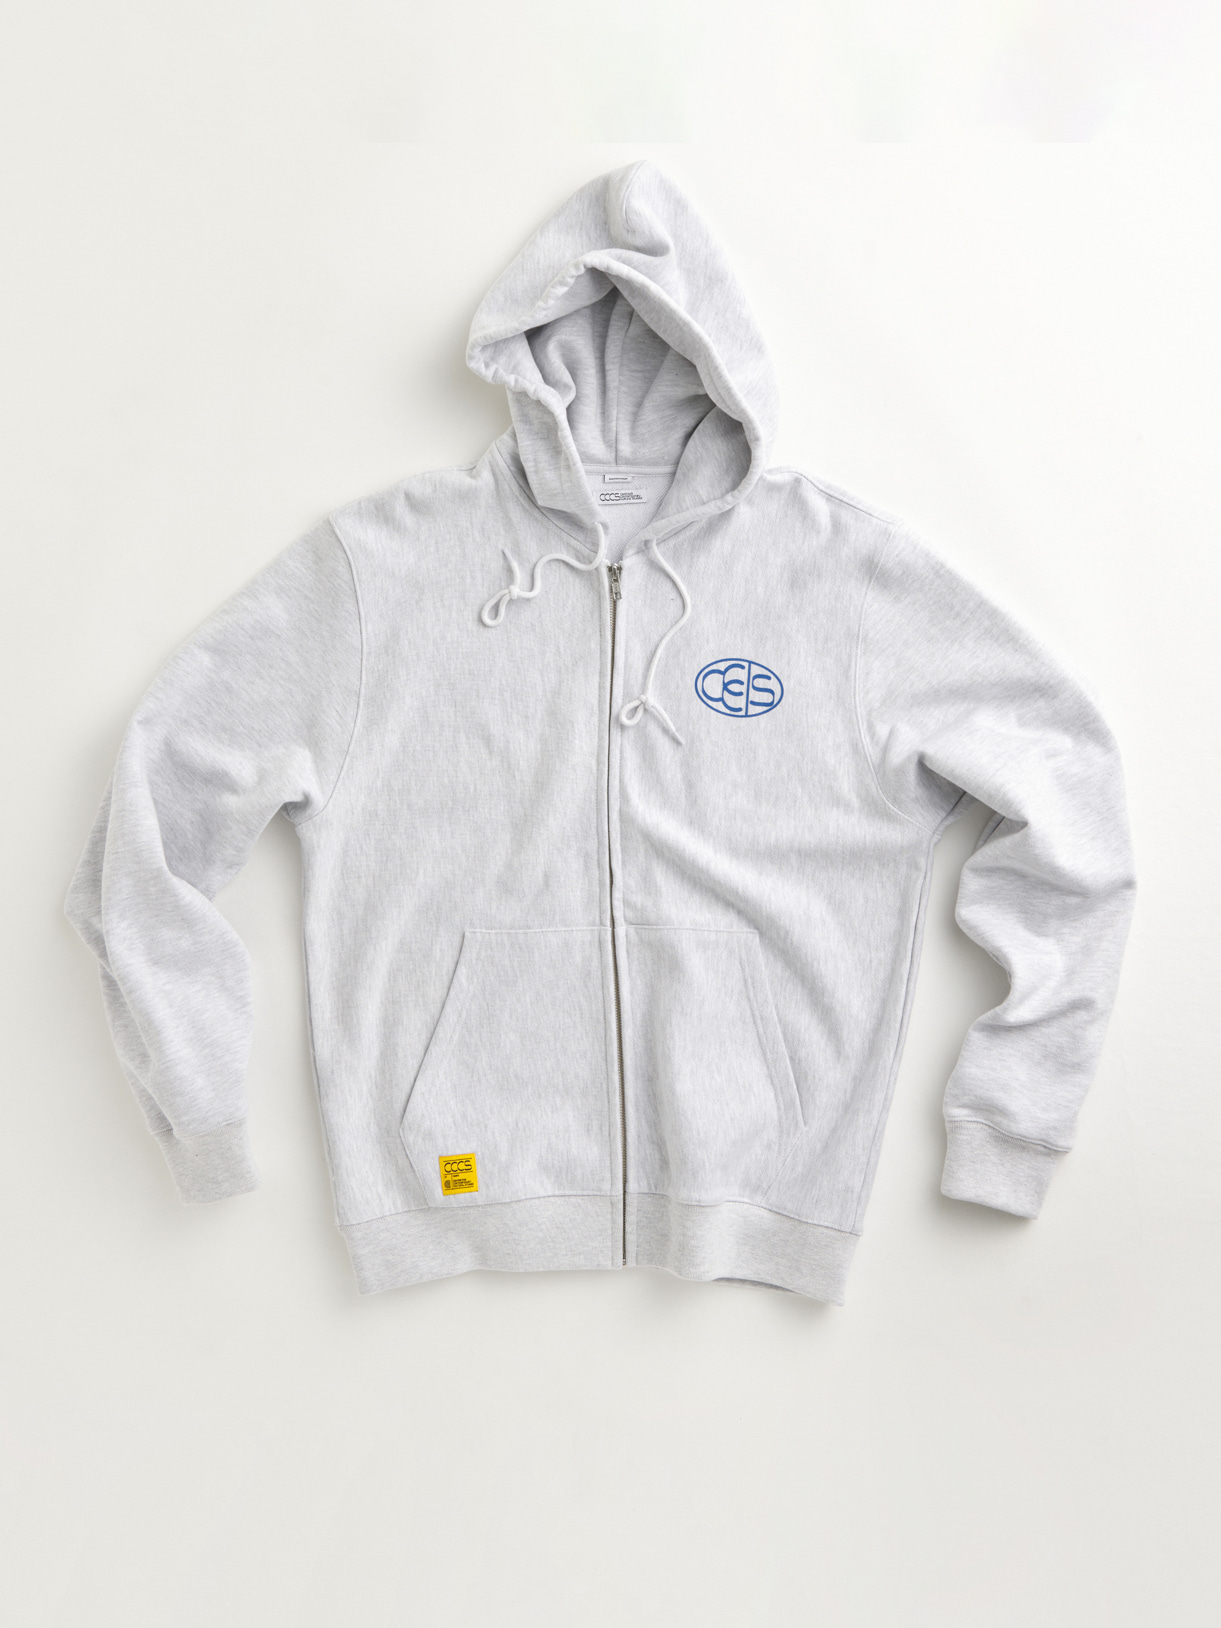 HEATHER GERY OVAL LOGO HOODED ZIP-UP